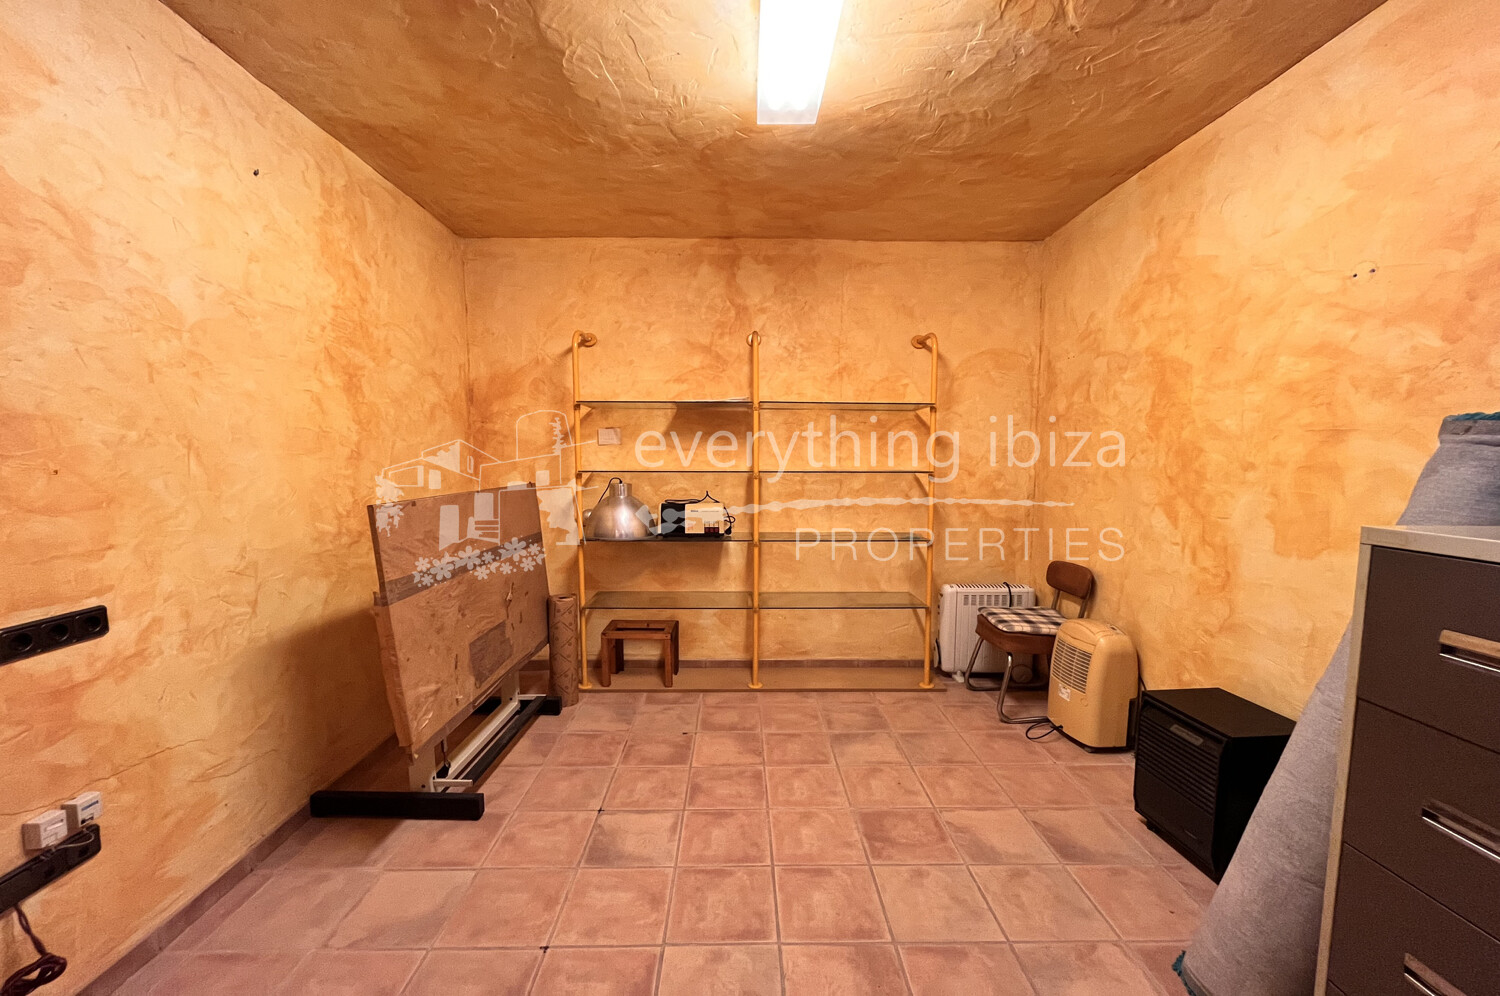 https://www.everythingibiza.com/properties/versatile-commer…of-san-jose-1640/,ref. 11, for sale in Ibiza by everything ibiza Properties